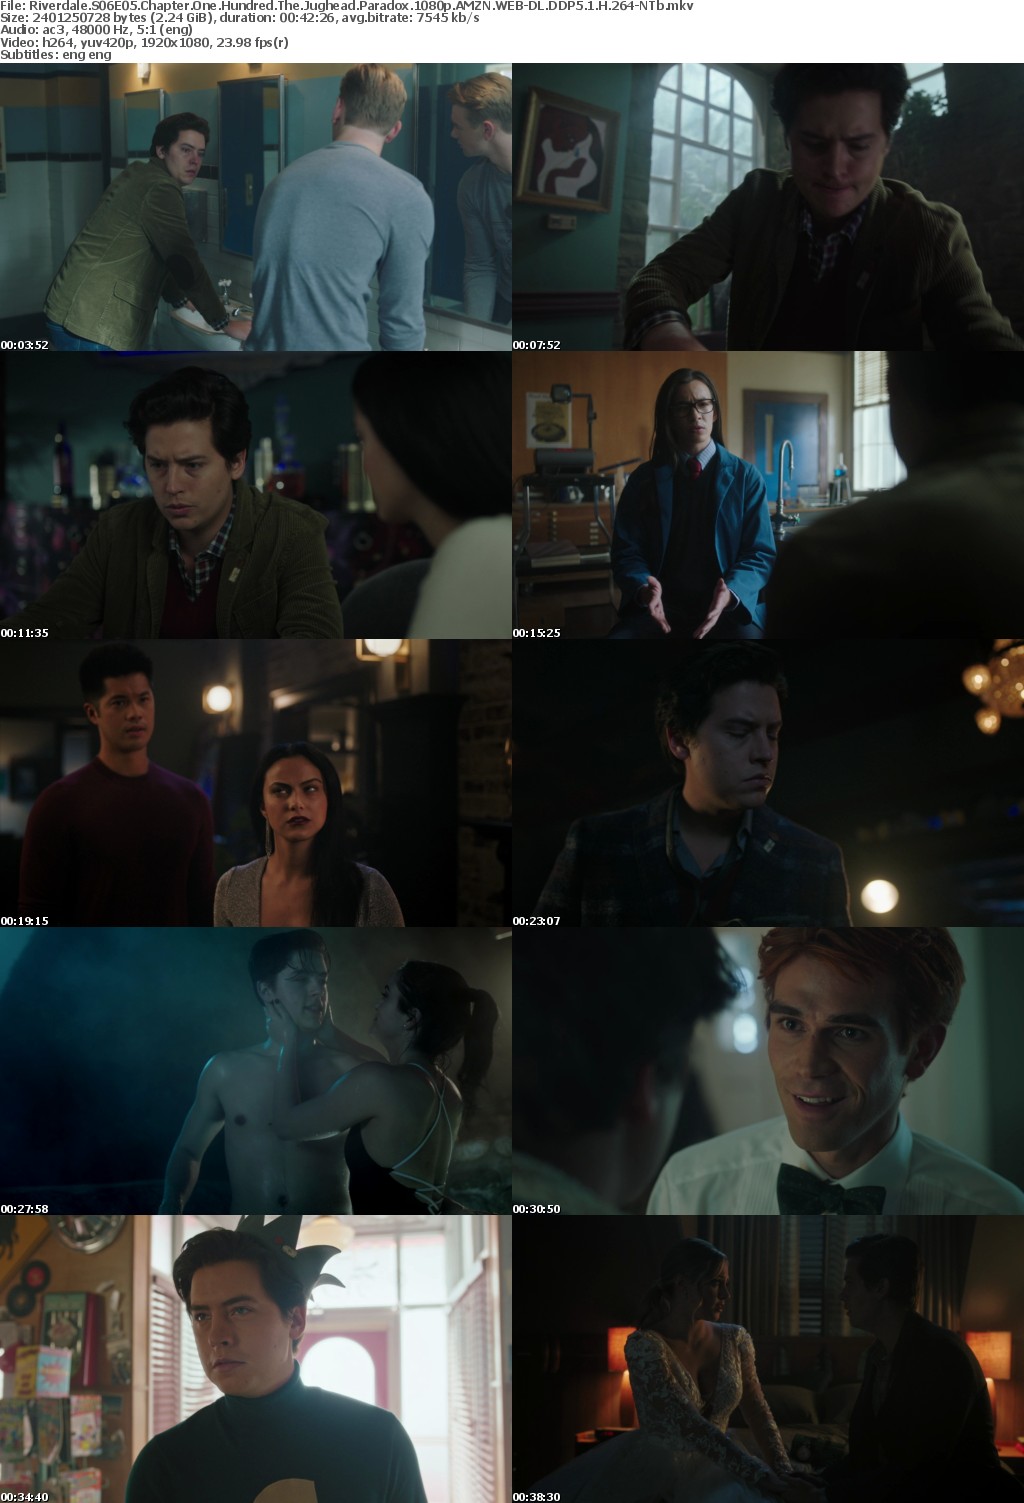 Riverdale US S06E05 Chapter One Hundred The Jughead Paradox 1080p AMZN WEBRip DDP5 1 x264-NTb